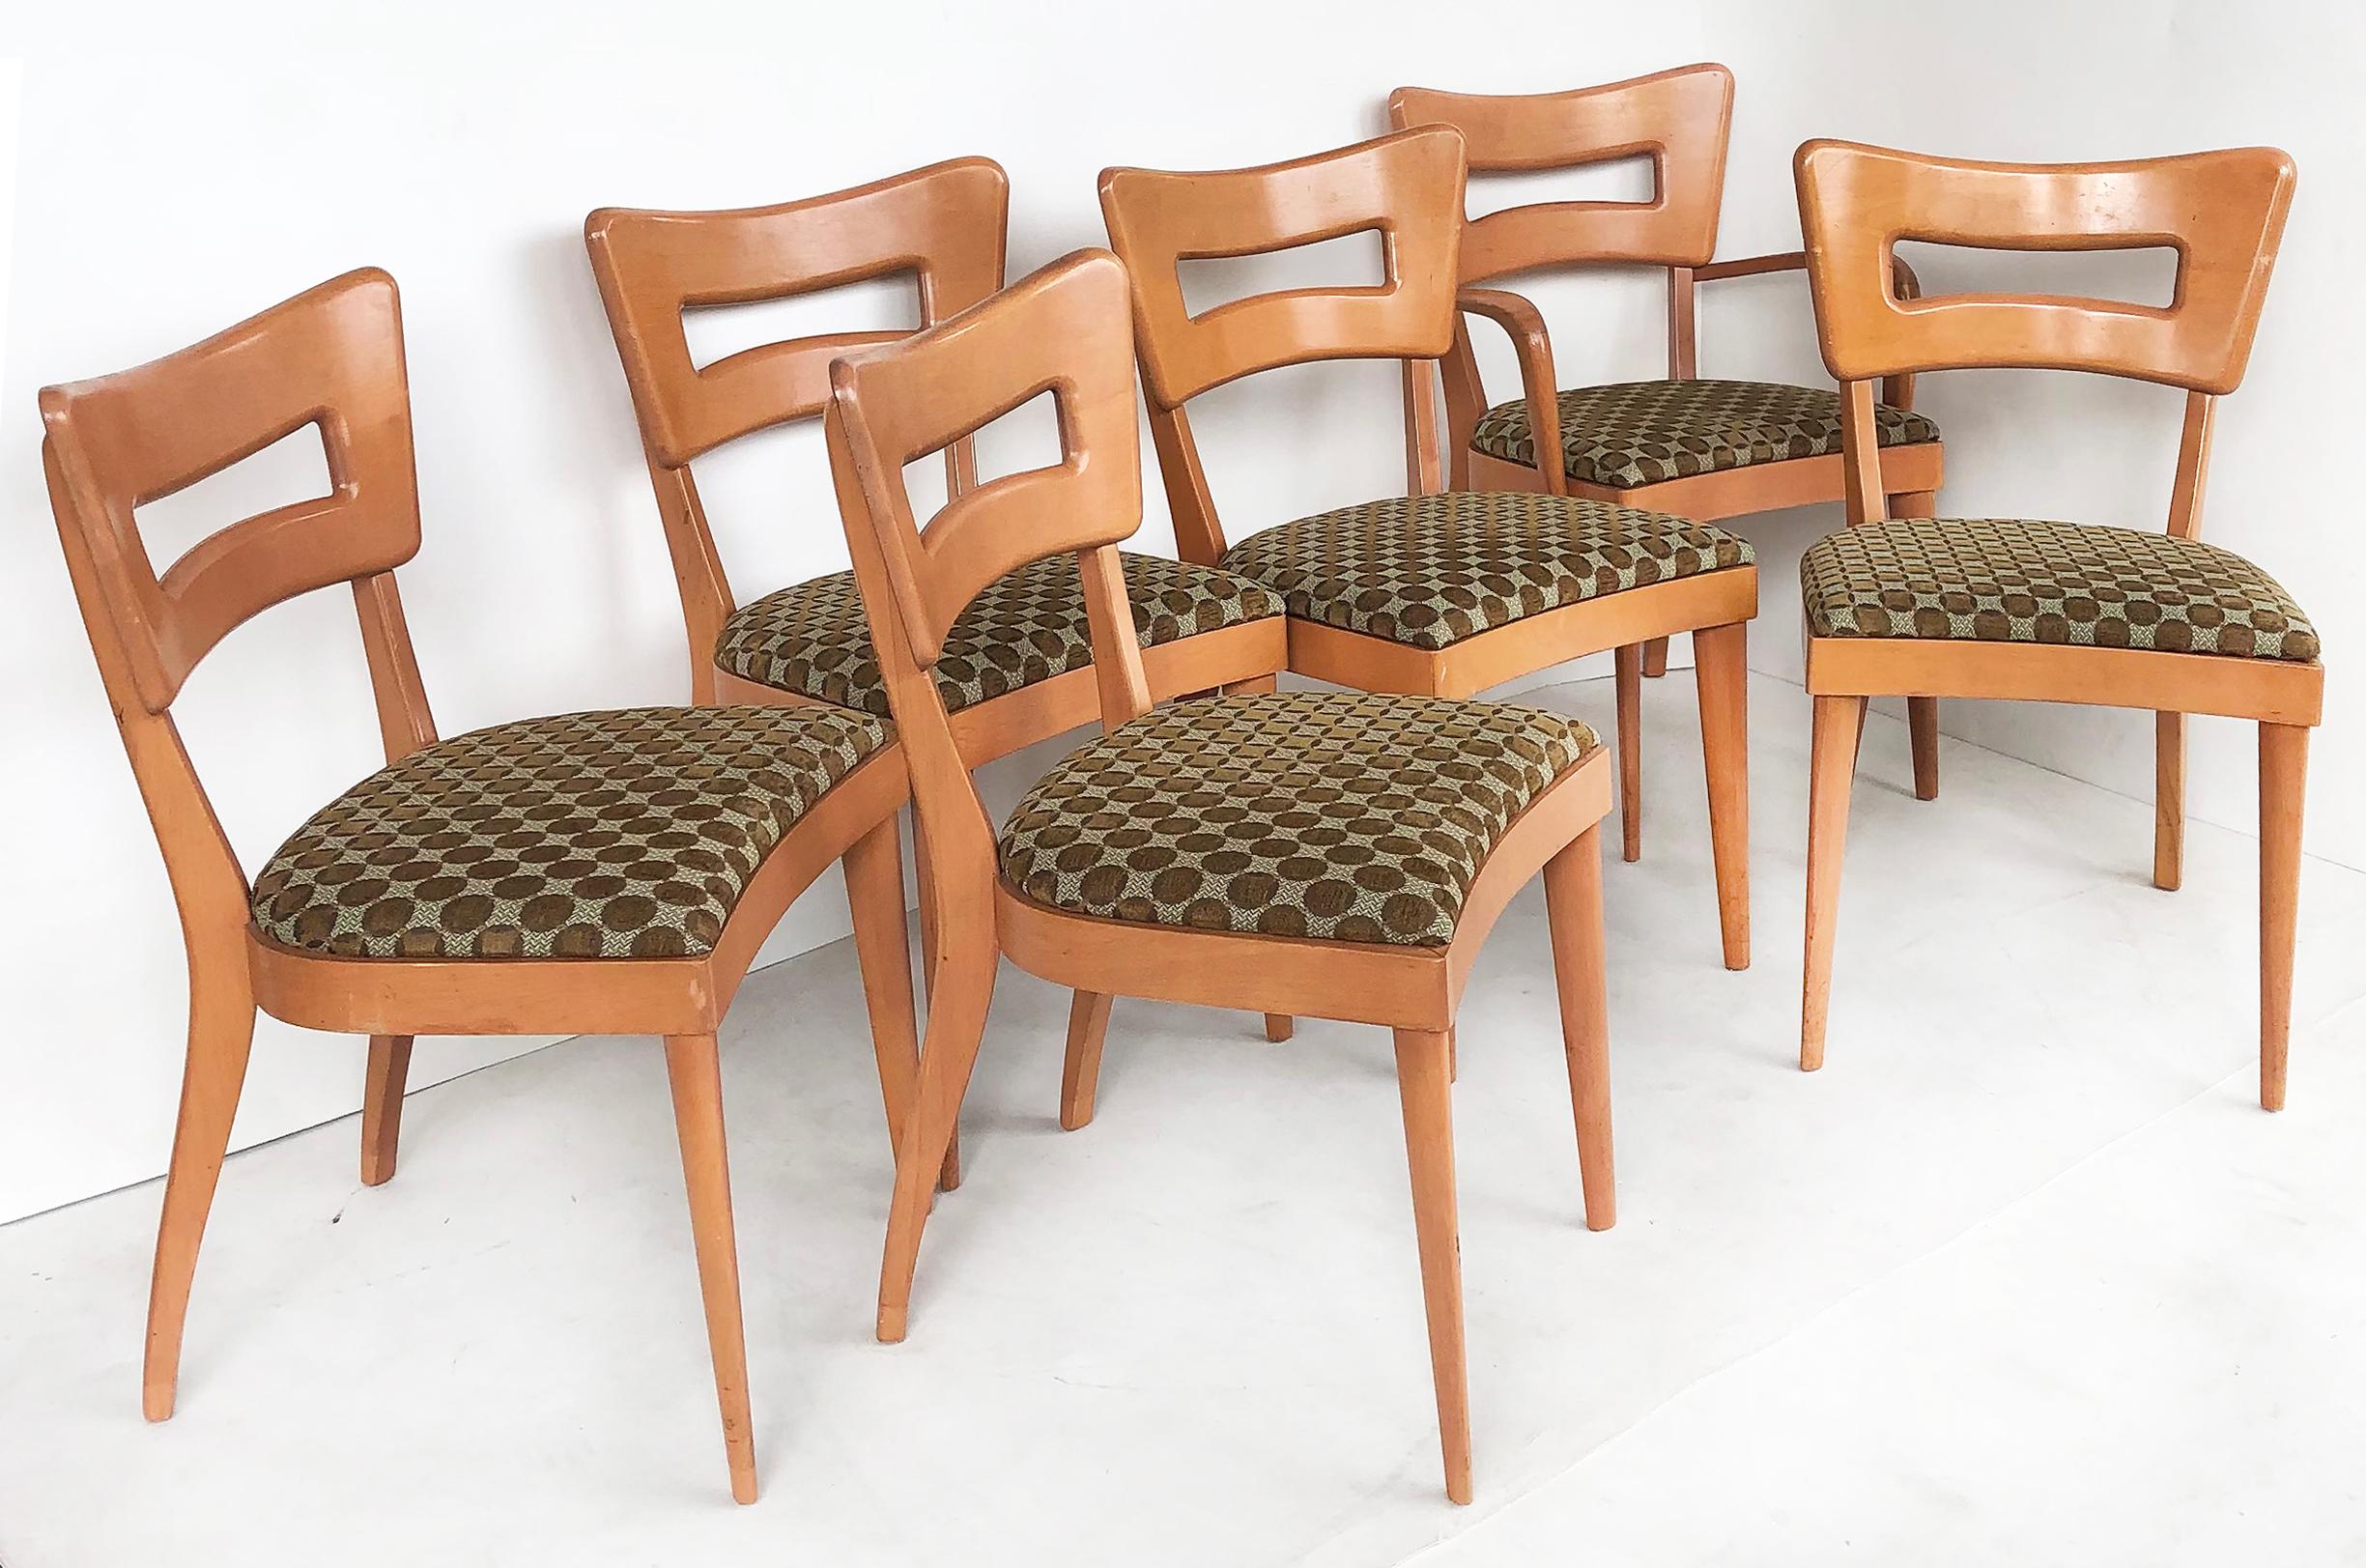 Heywood Wakefield wishbone dog-biscuit dining chairs set of six

Offered for sale is a set of six mid-century modern Heywood-Wakefield 